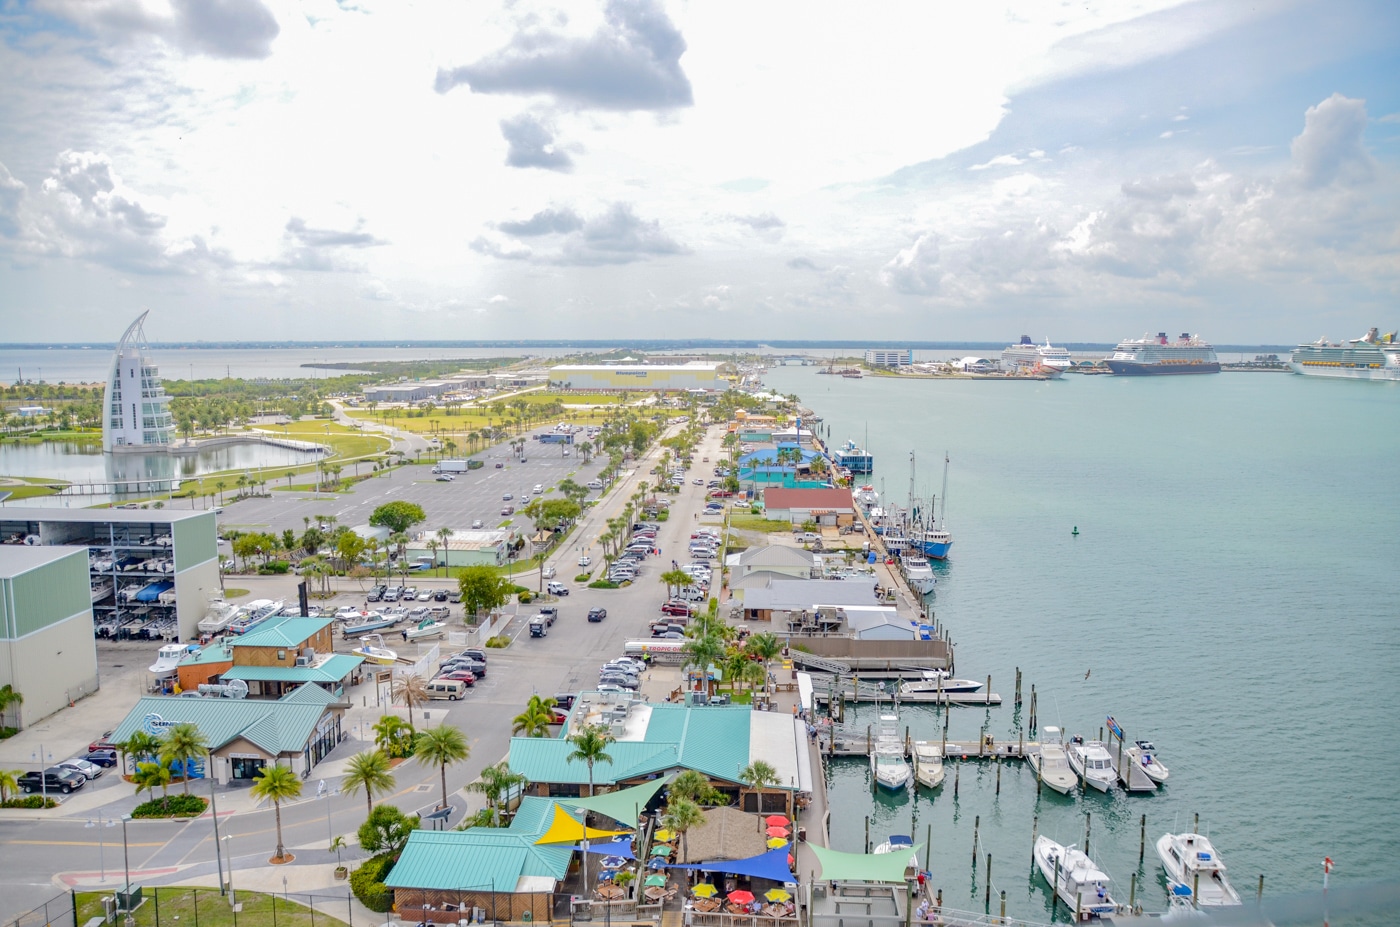 Port Canaveral parking and port area